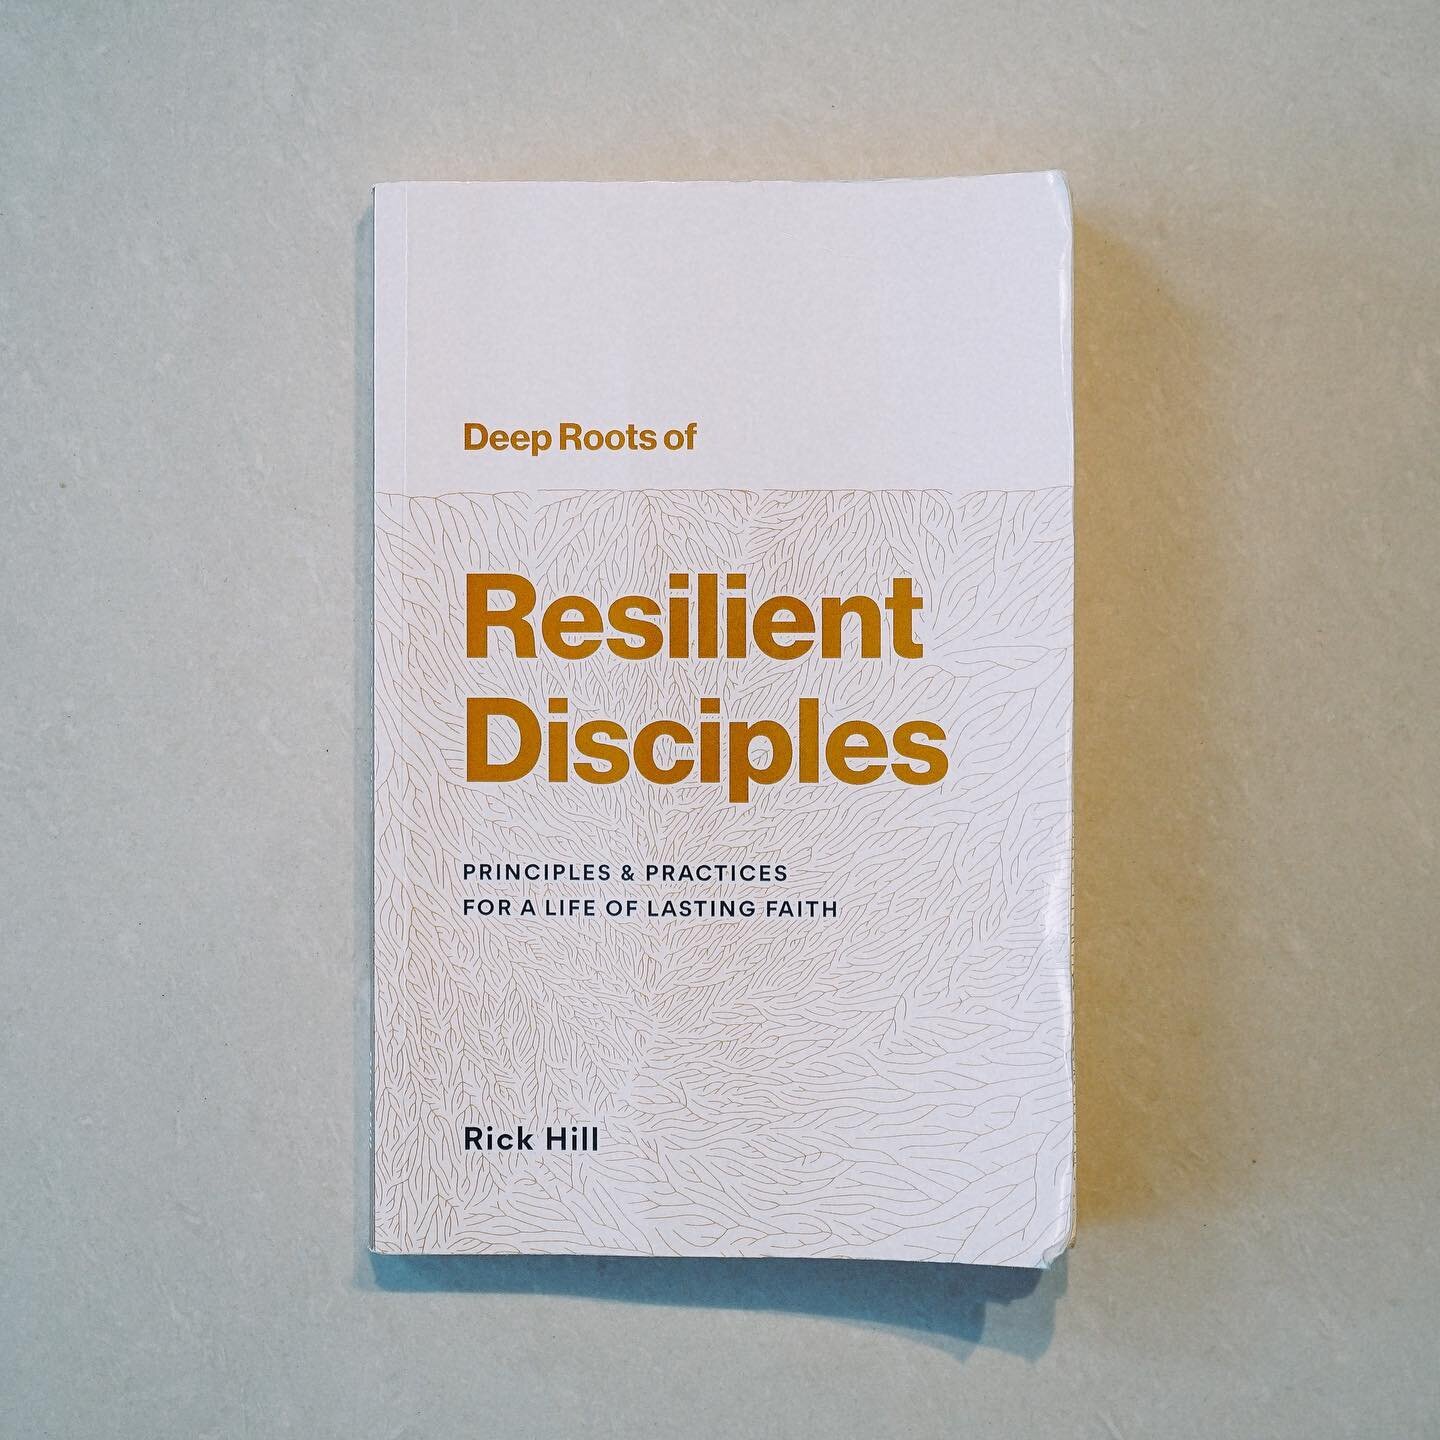 REMNANT RESOURCES 📚✏️

We were delighted to hear from @rickhillni in an interview at our first gathering on Saturday night. We asked Rick to share openly about a number of big picture challenges &amp; encouragements relating to Young Adults ministry